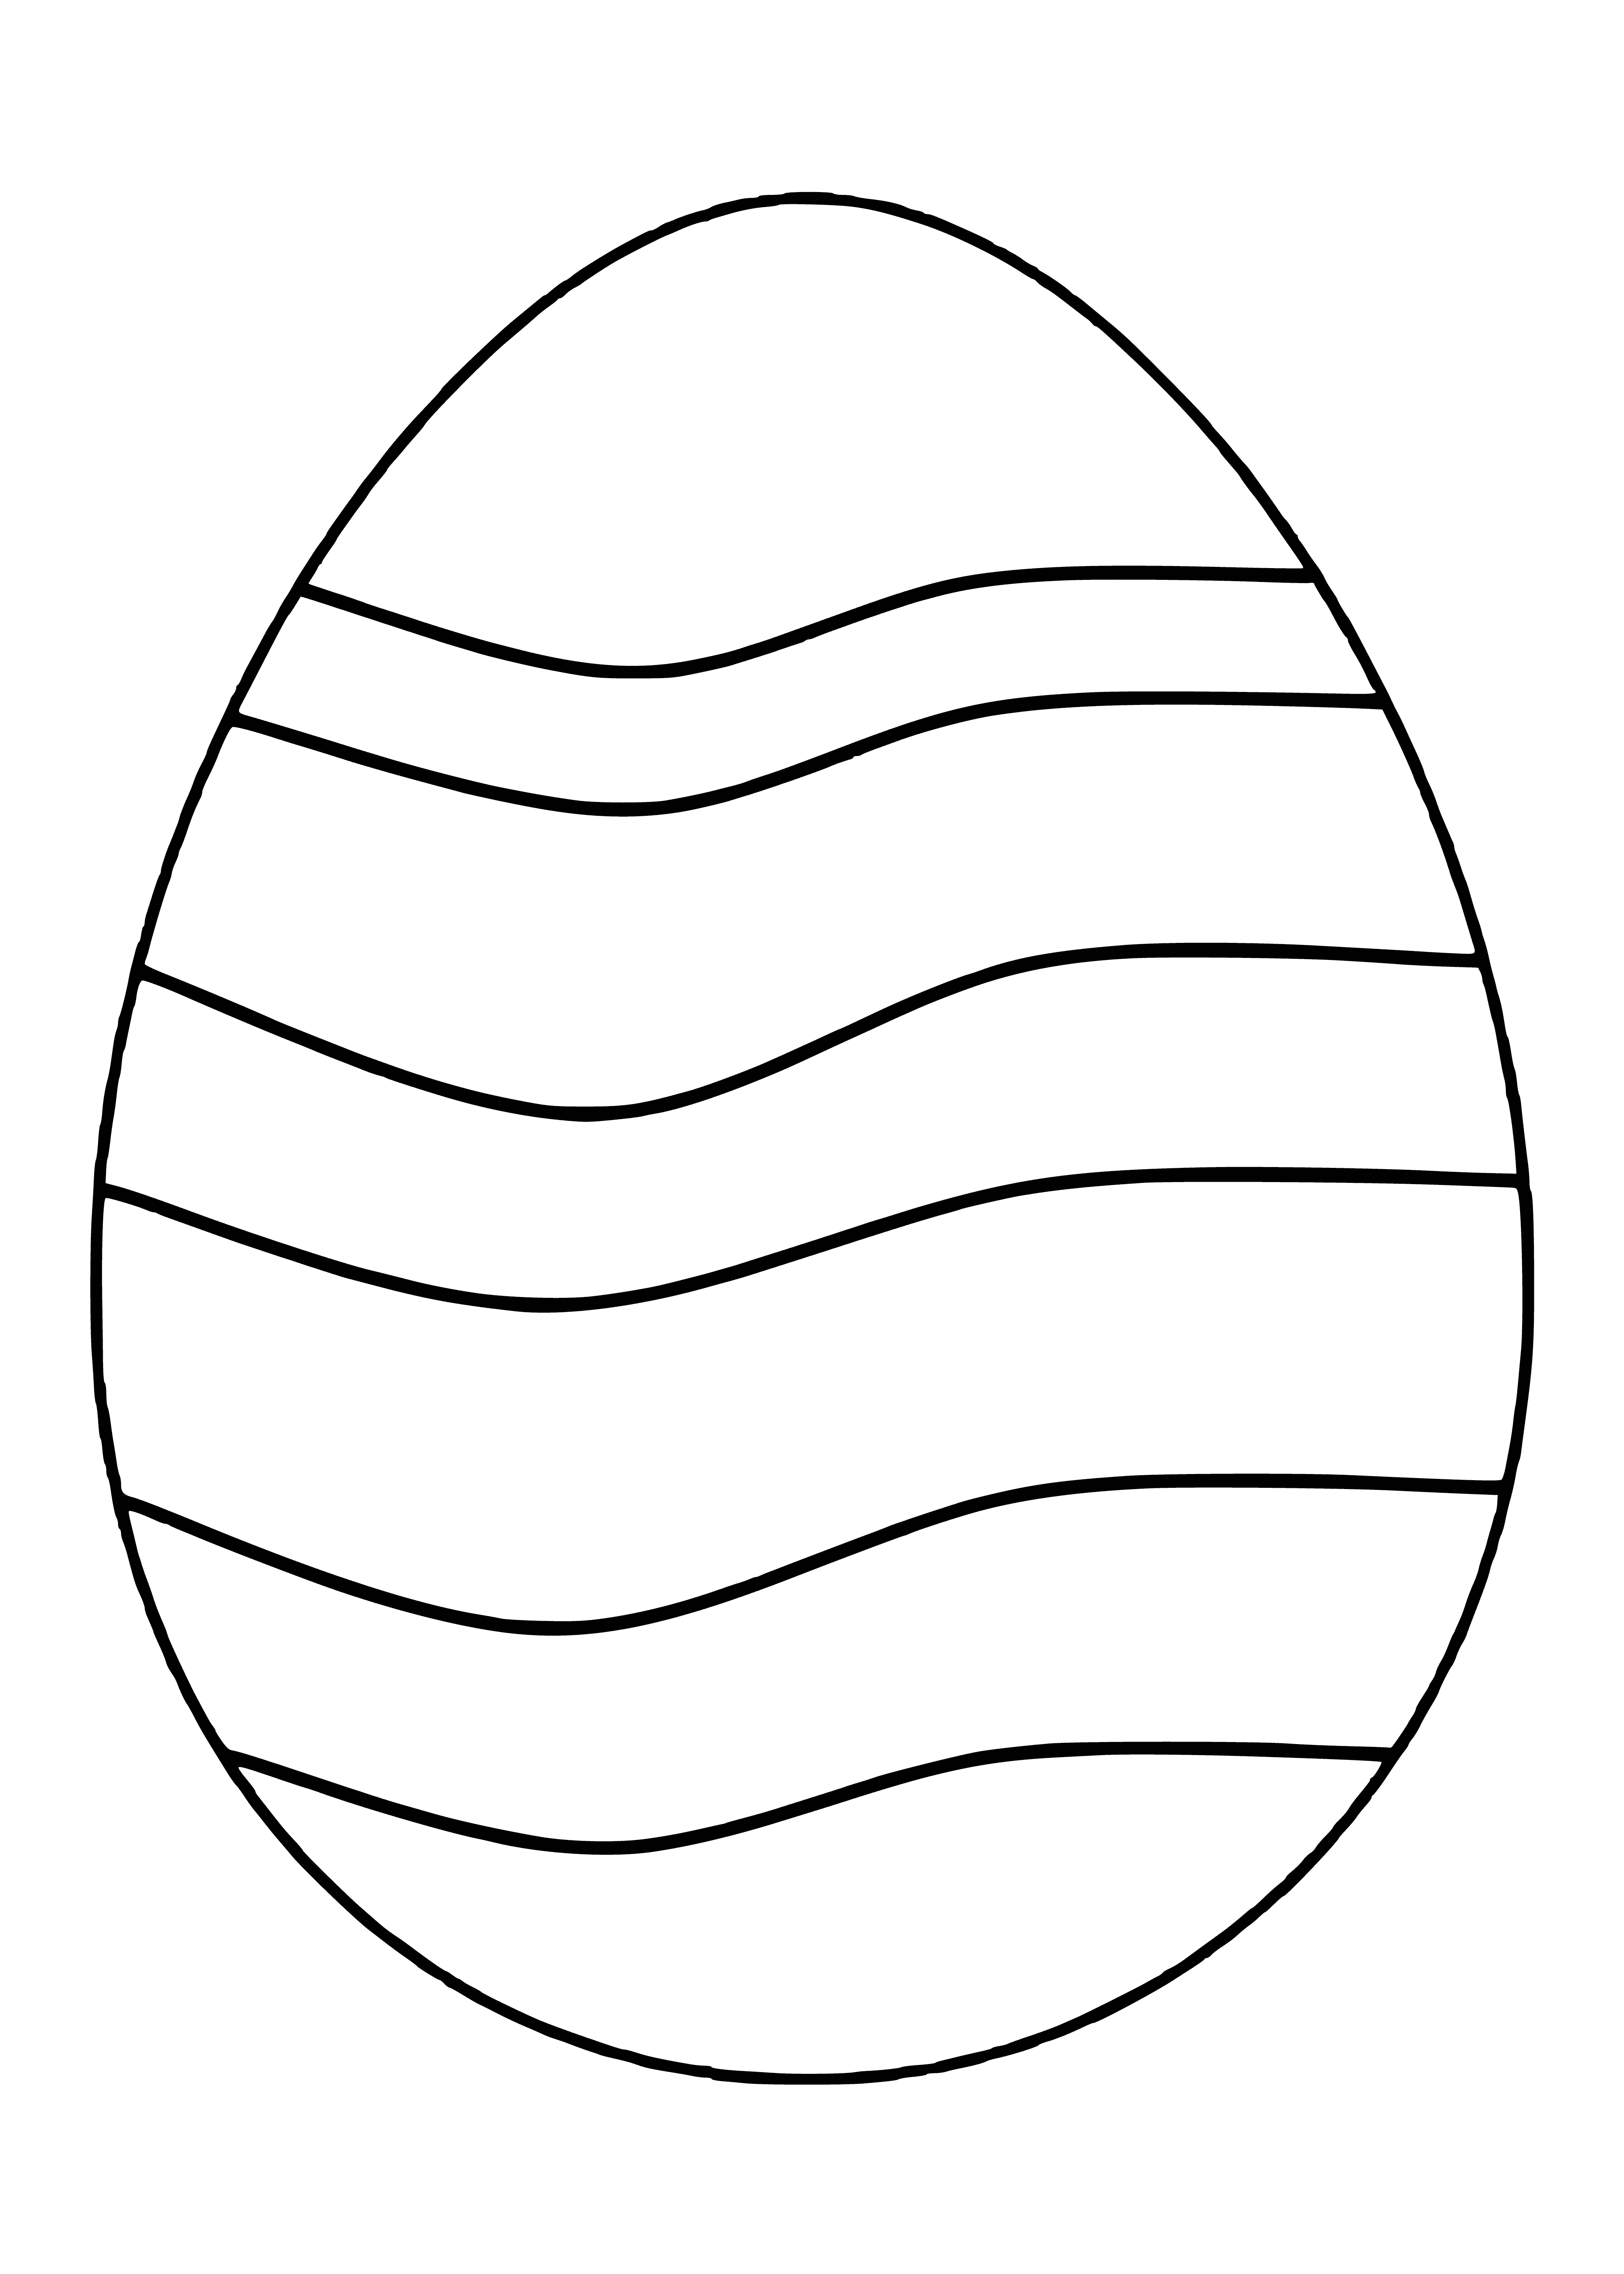 coloring page: Three Easter eggs in coloring page: blue (biggest), green (middle) & pink (smallest).